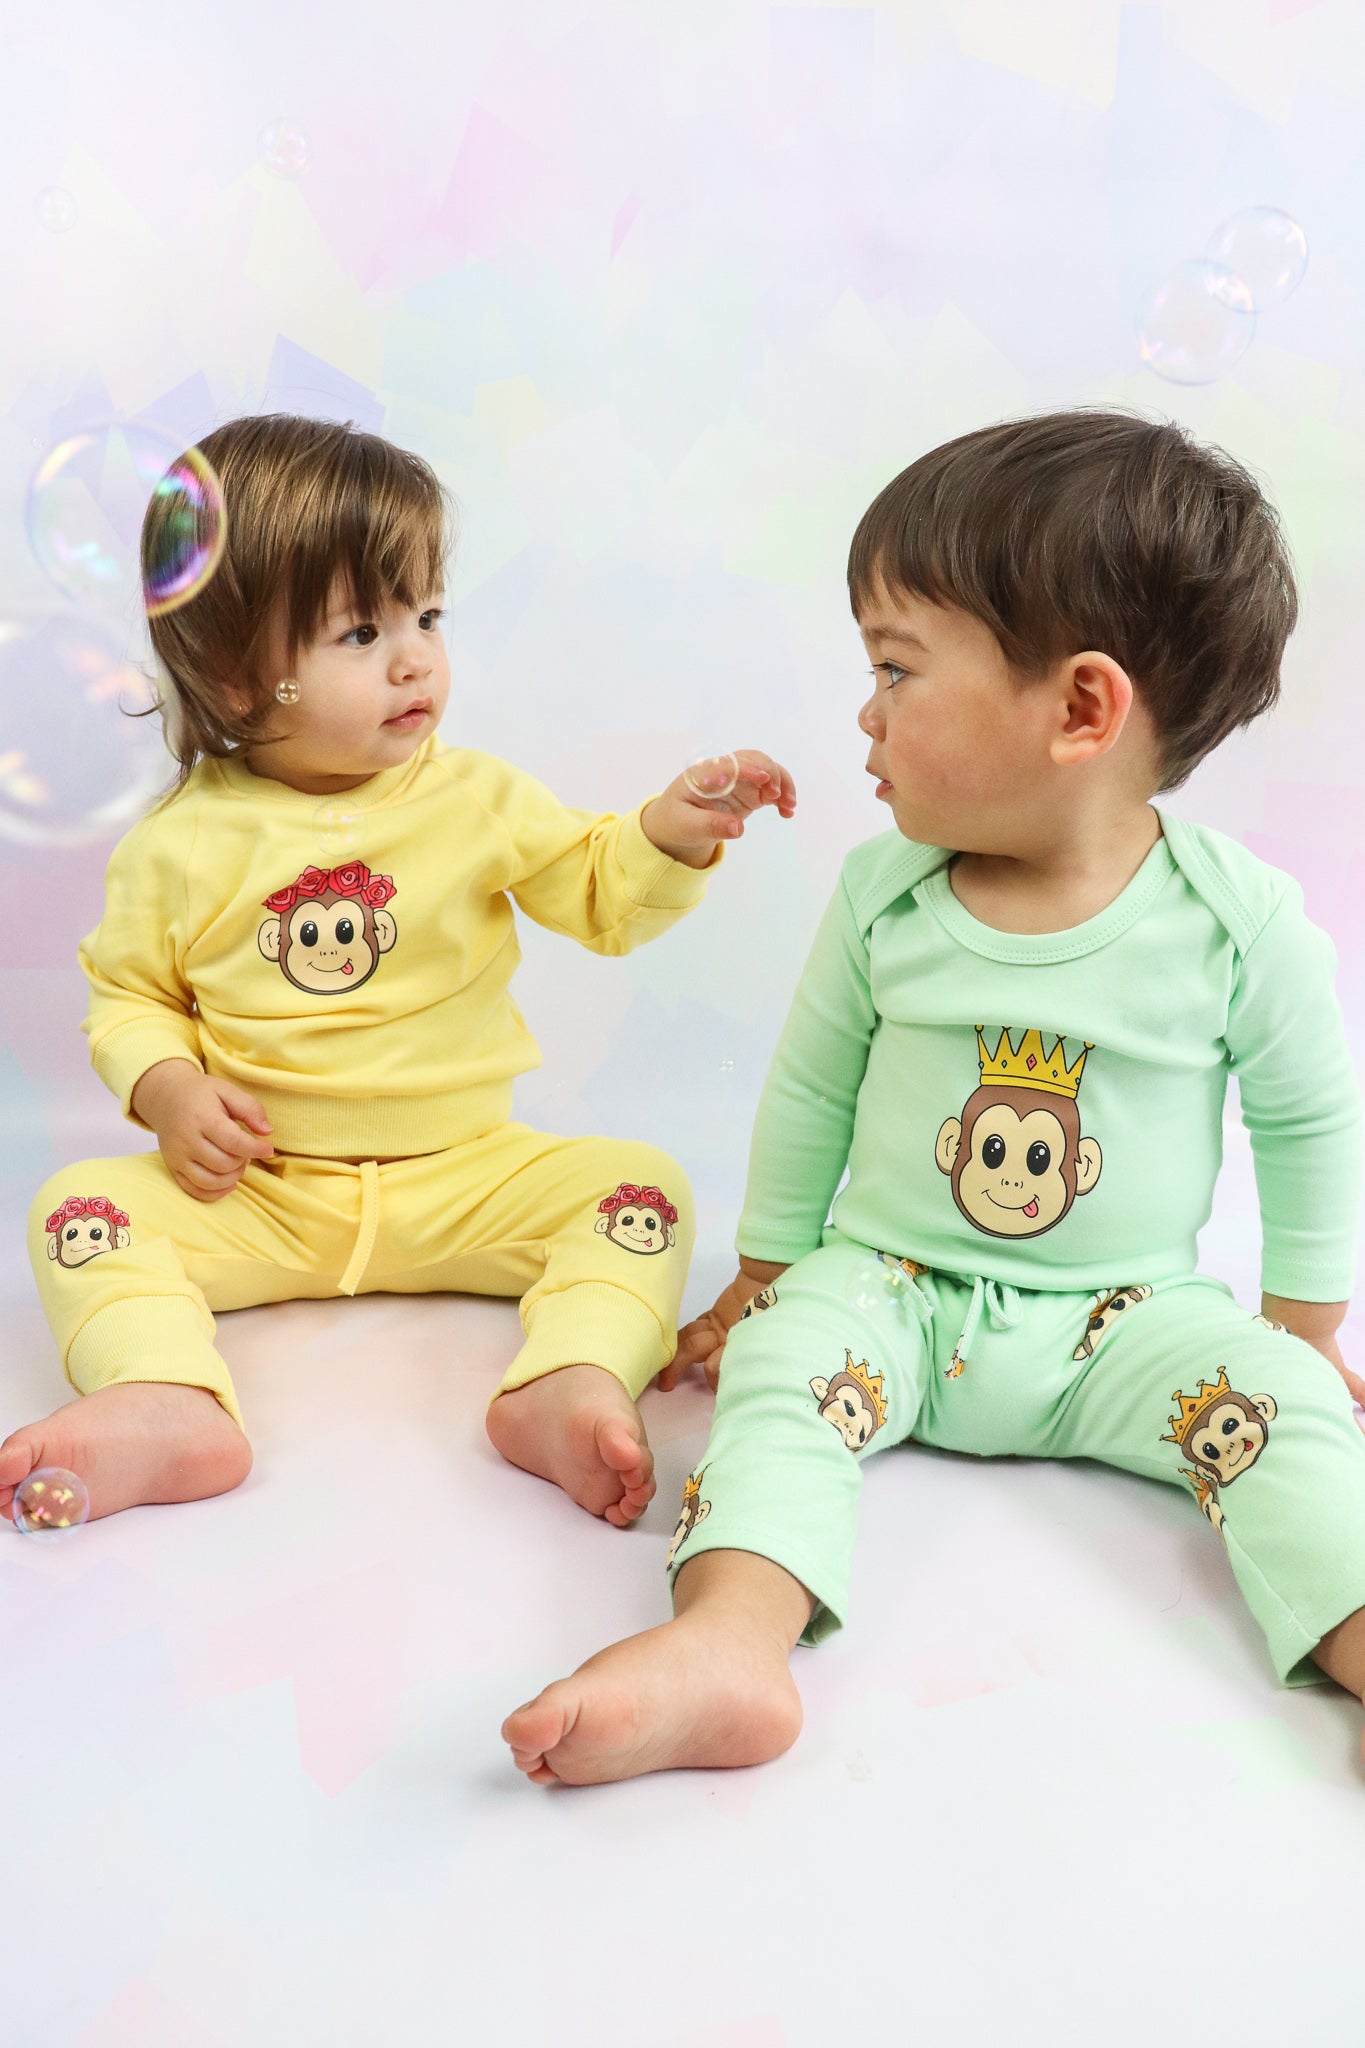 2 toddlers sitting down wearing colourful baby clothing with cute monkey design